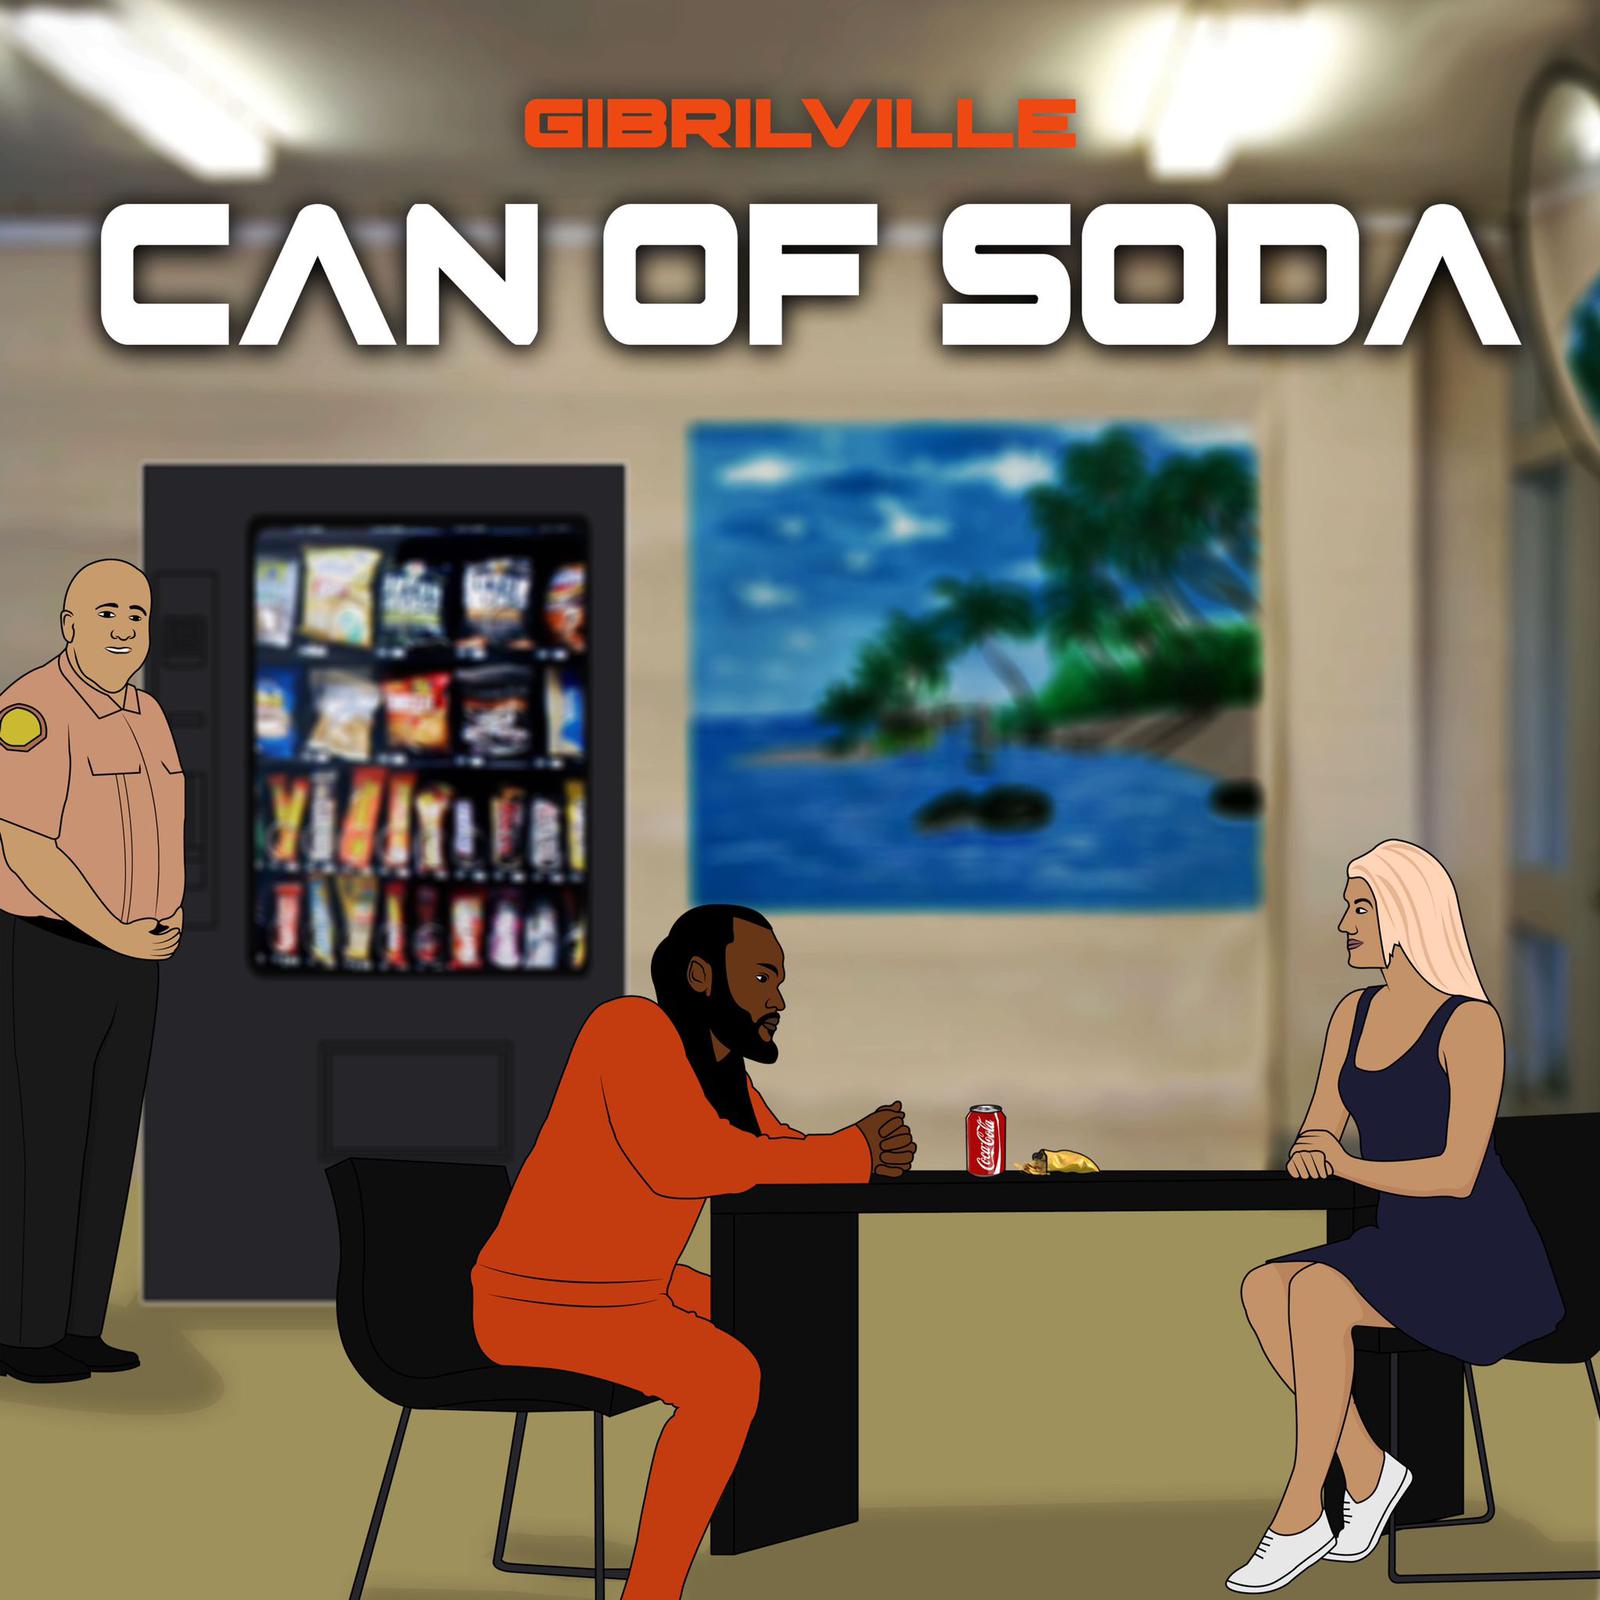 African star Gibrilville releases new hit single, Can of Soda